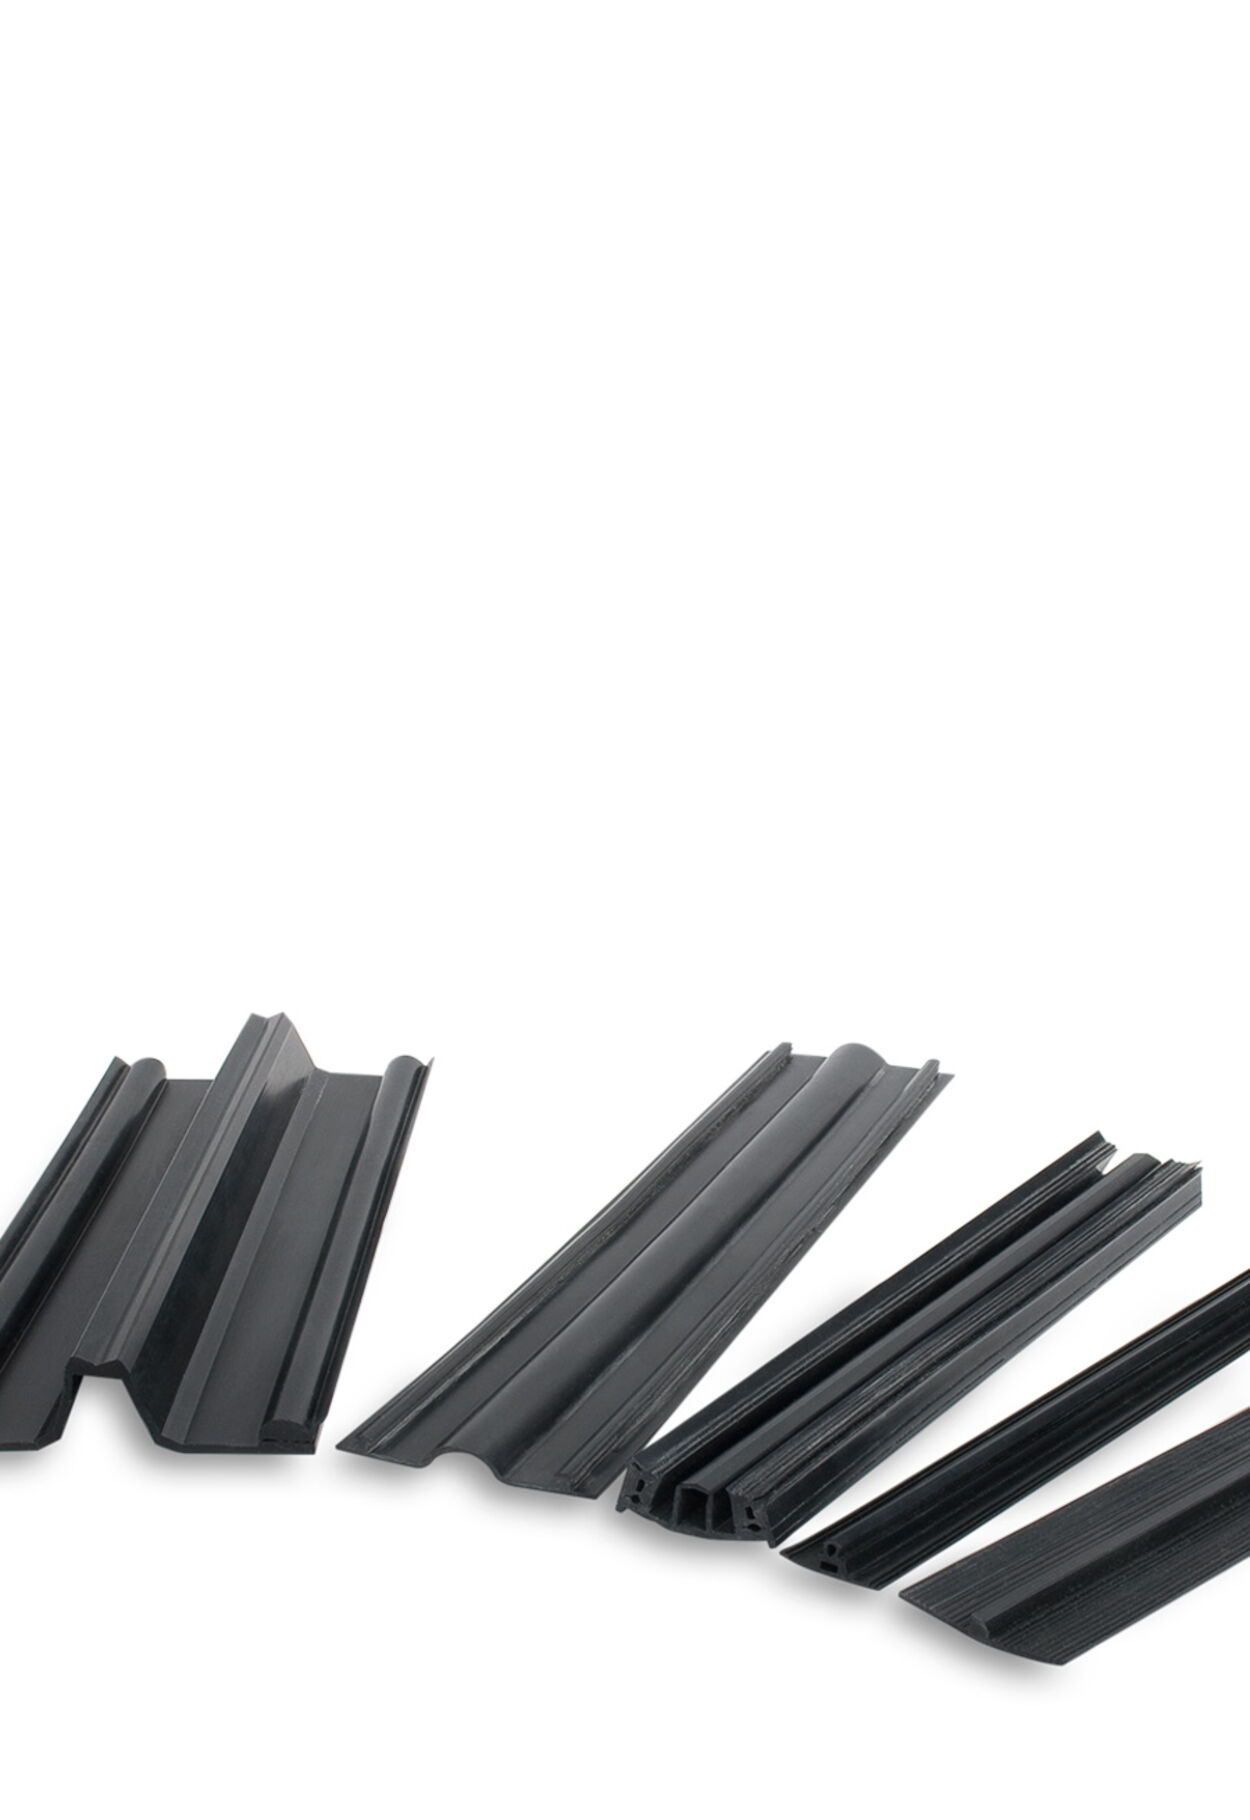 Elastomer joint   profiles for joint sealing